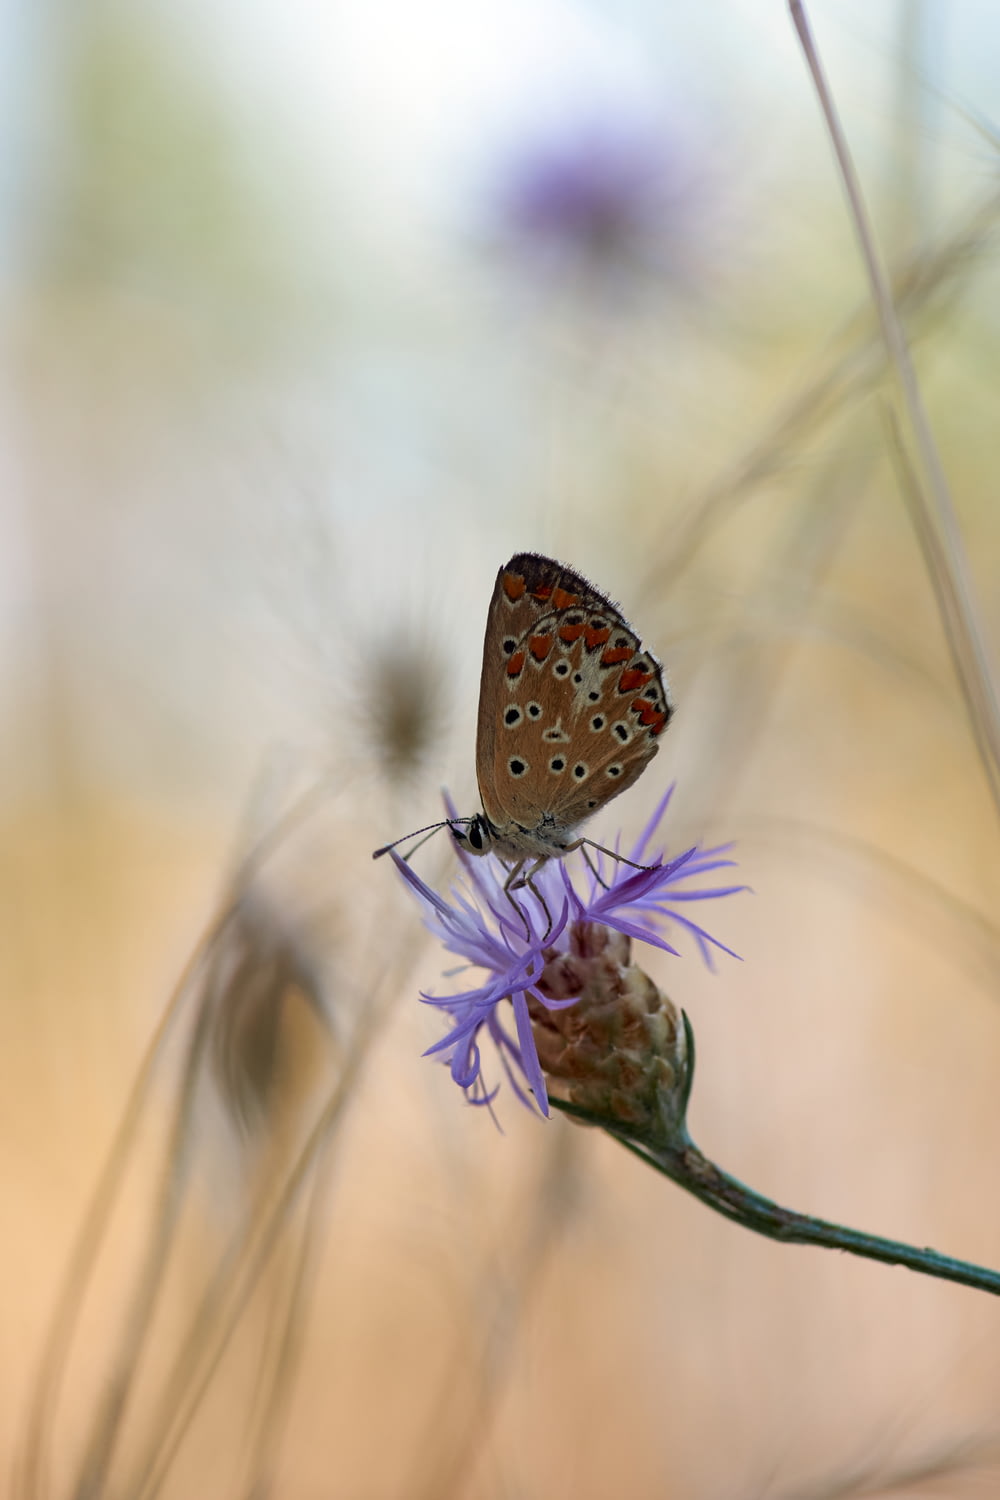 brown and white butterfly perched on purple flower in close up photography during daytime